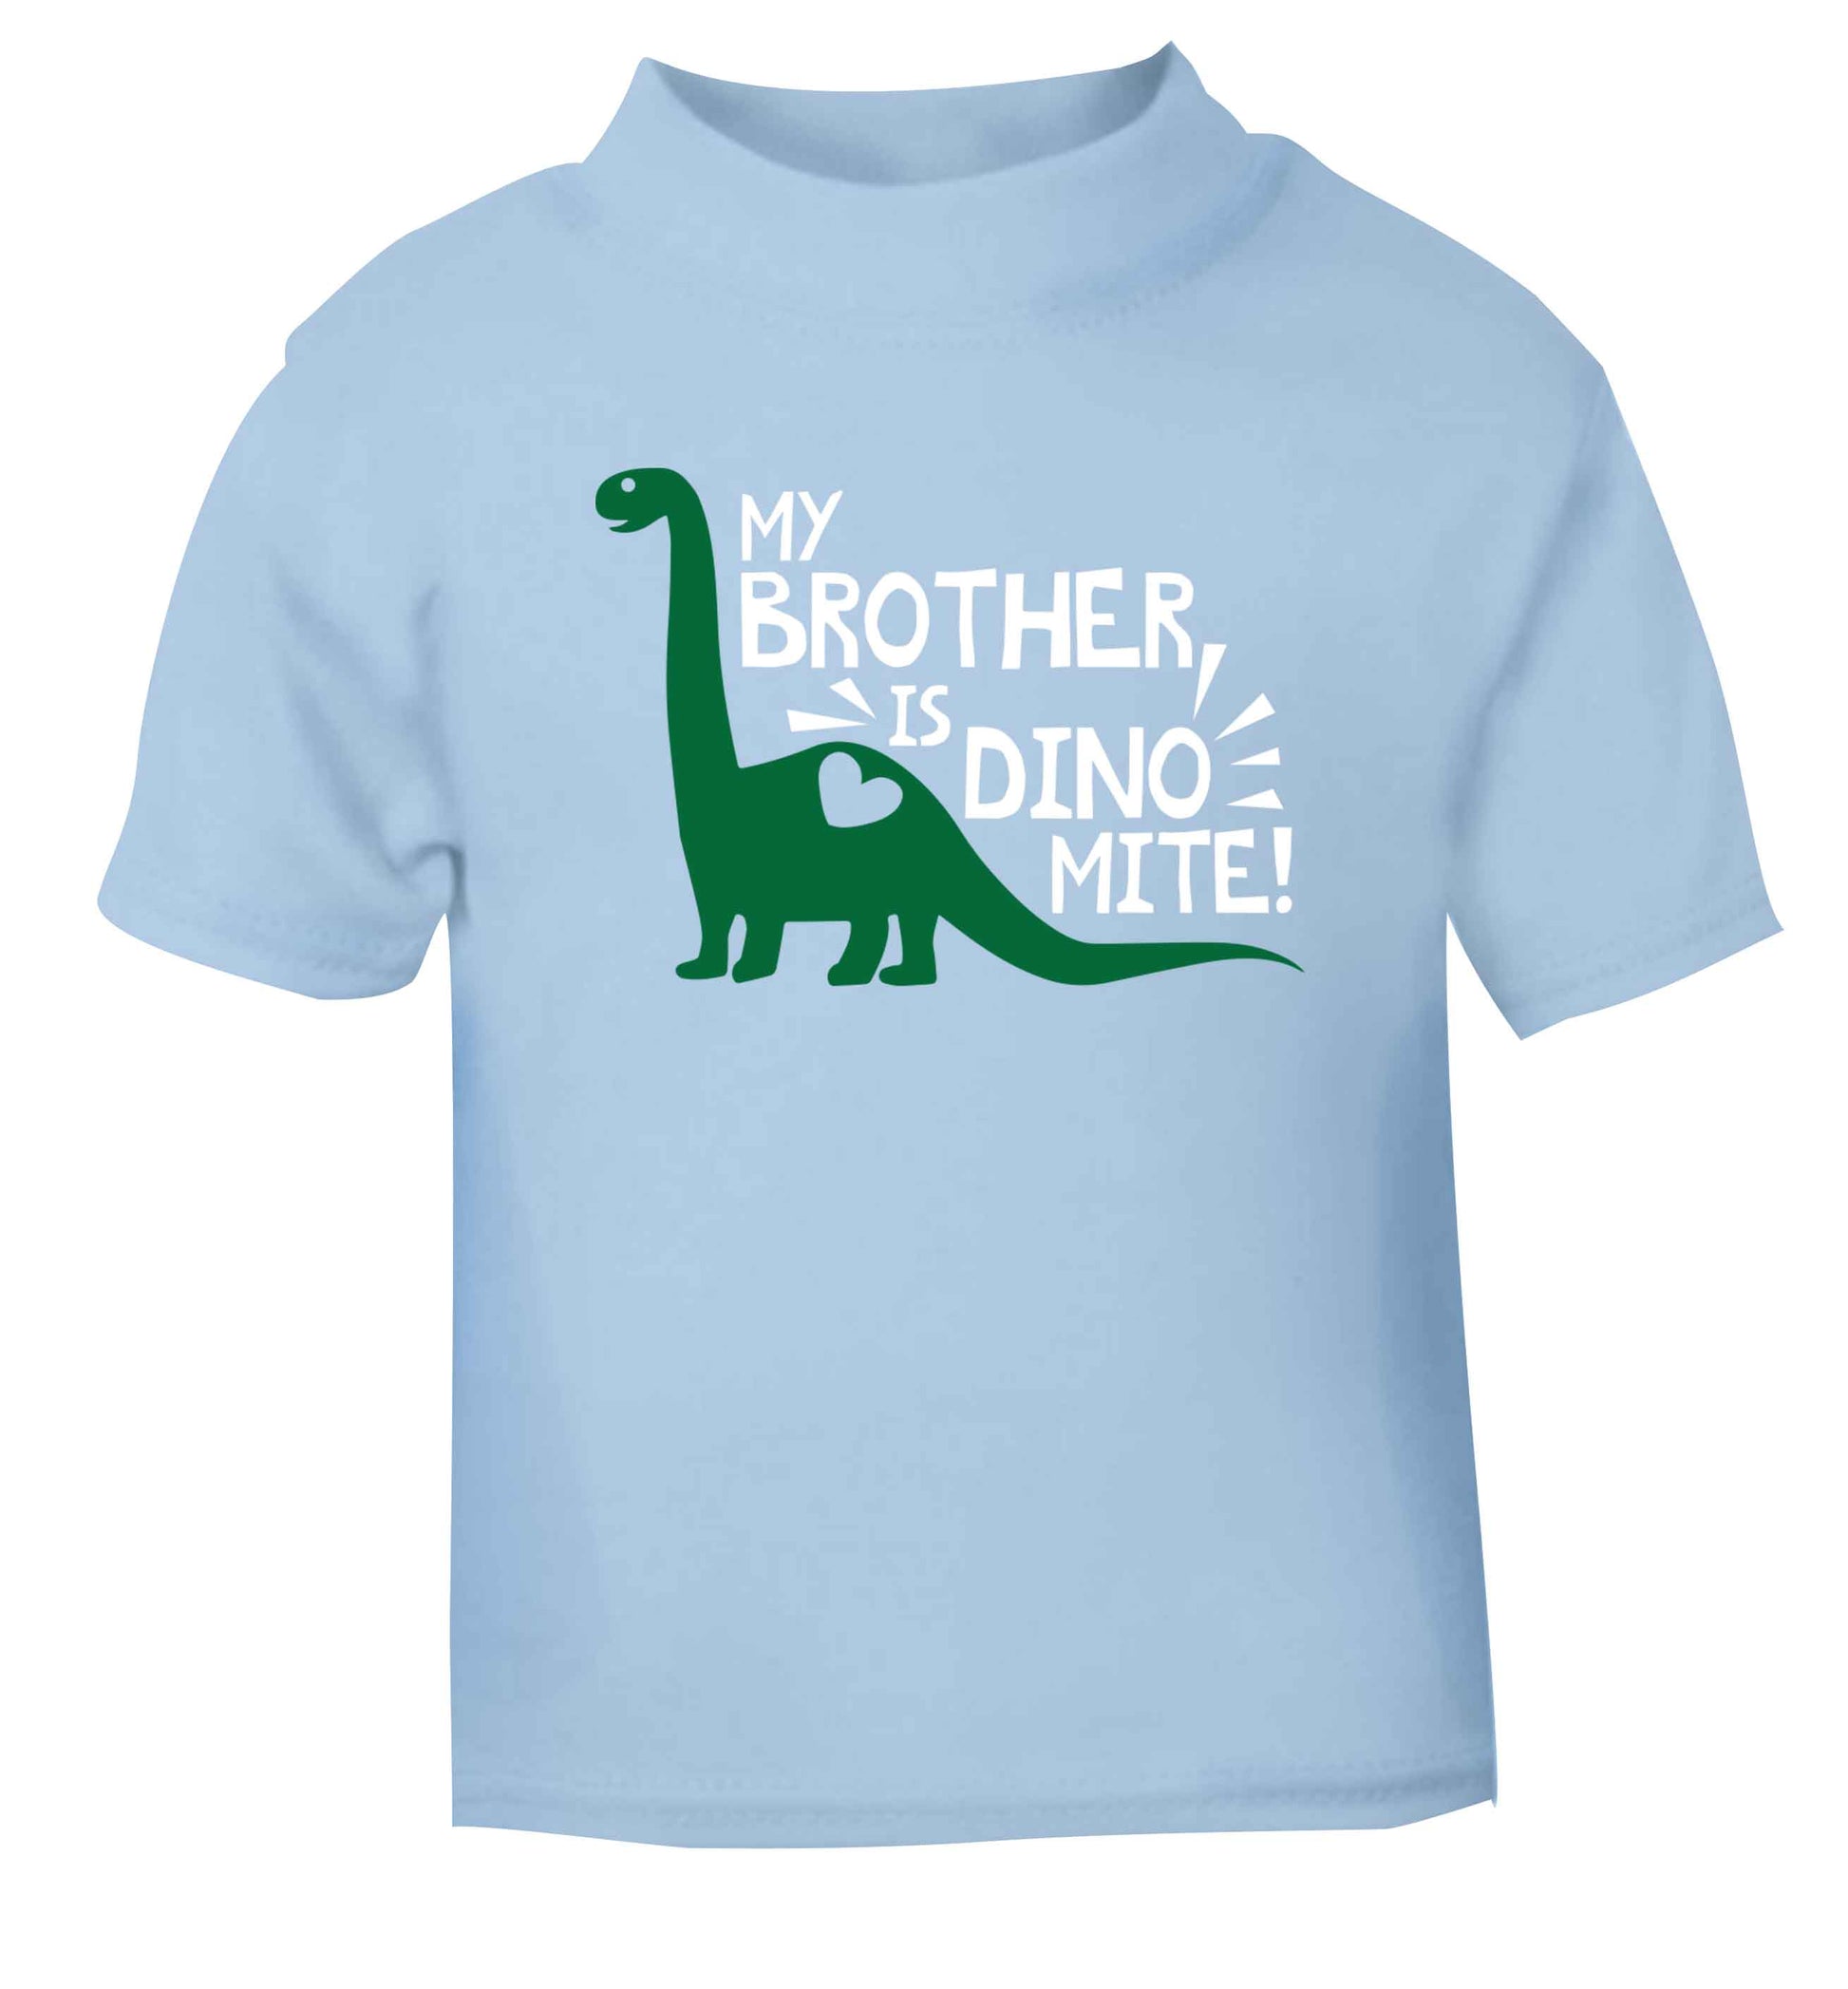 My brother is dinomite! light blue Baby Toddler Tshirt 2 Years